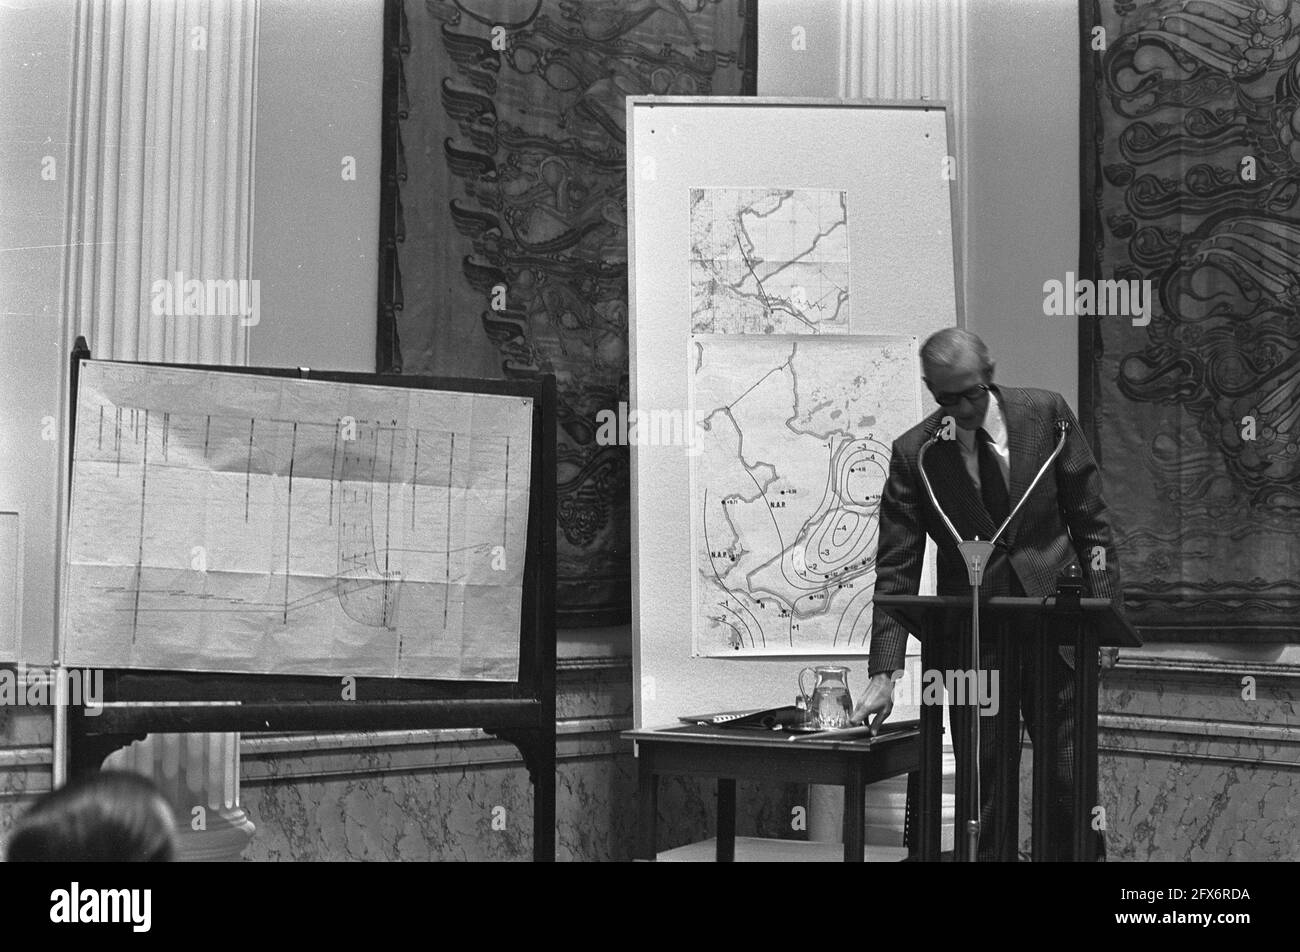 Hearing on waste discharge from Naarden chemical plant in Province House at Naarden, man at maps, February 5, 1973, hearings, The Netherlands, 20th century press agency photo, news to remember, documentary, historic photography 1945-1990, visual stories, human history of the Twentieth Century, capturing moments in time Stock Photo